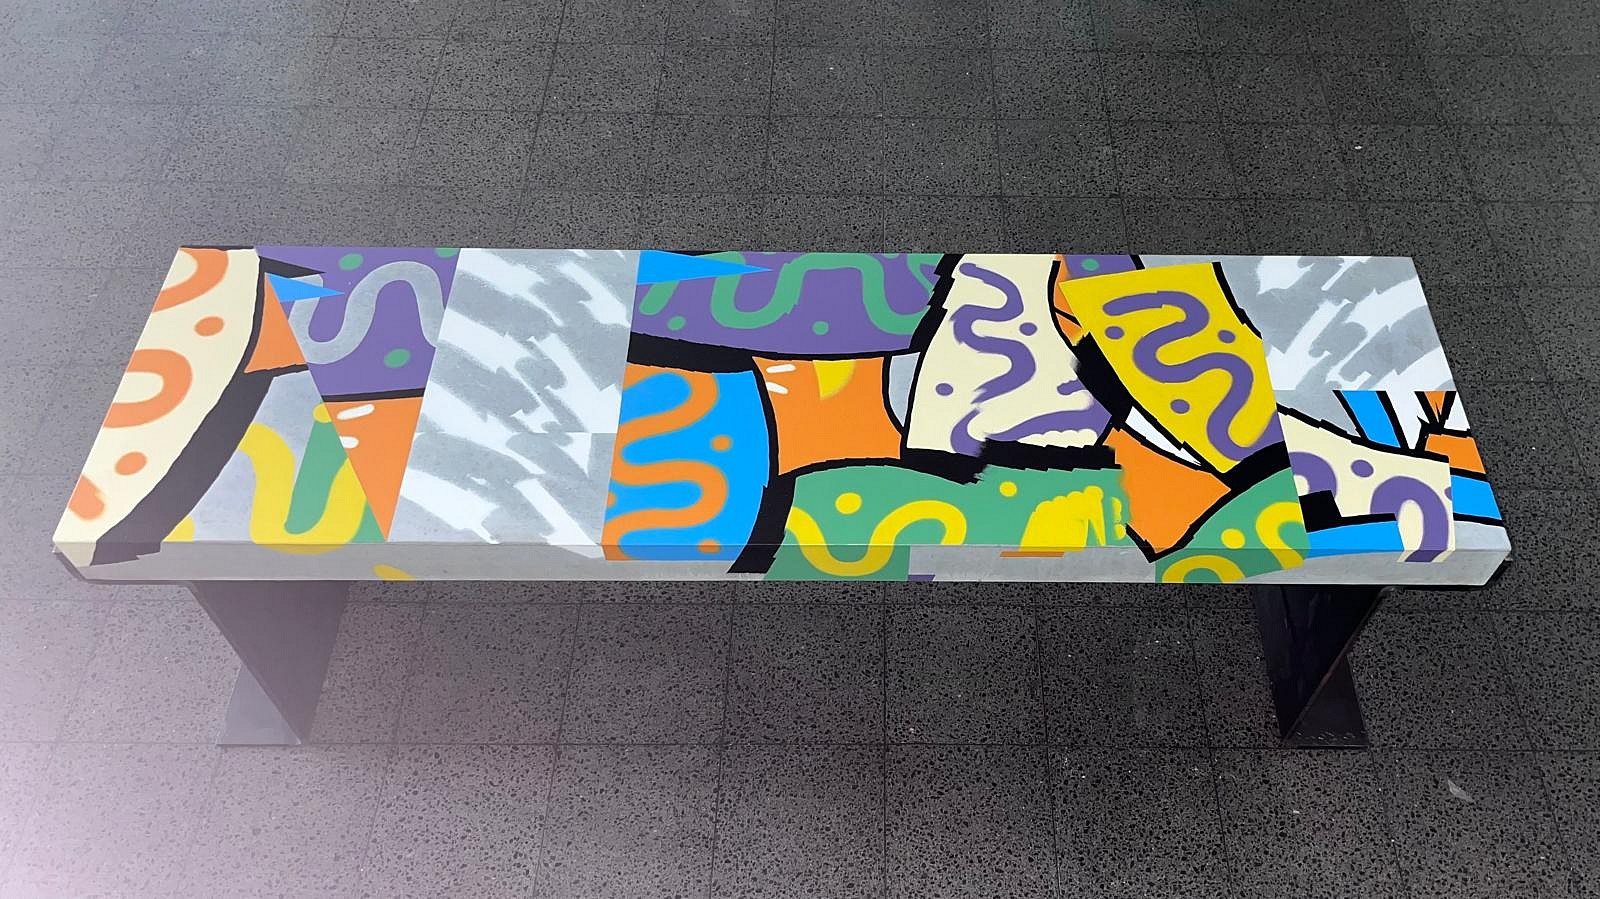 Brothers of Light, Bench 2
2024, Acrylic Enamel on concrete